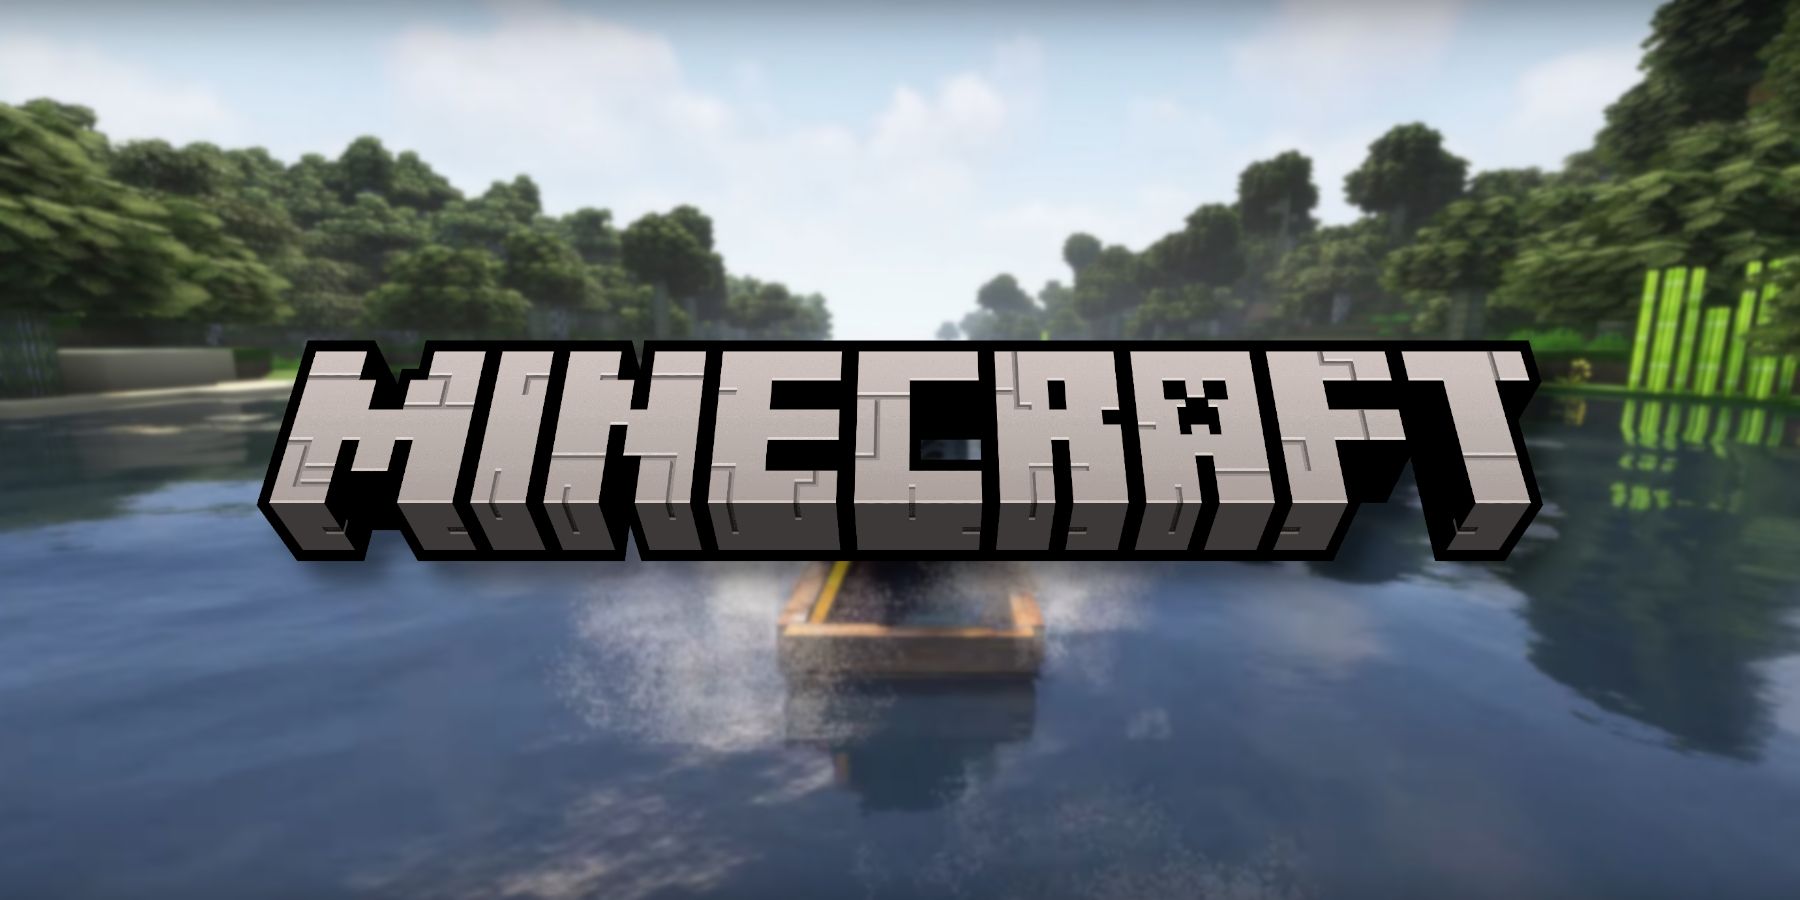 Minecraft Video Shows the Game With Gorgeously Realistic
Water